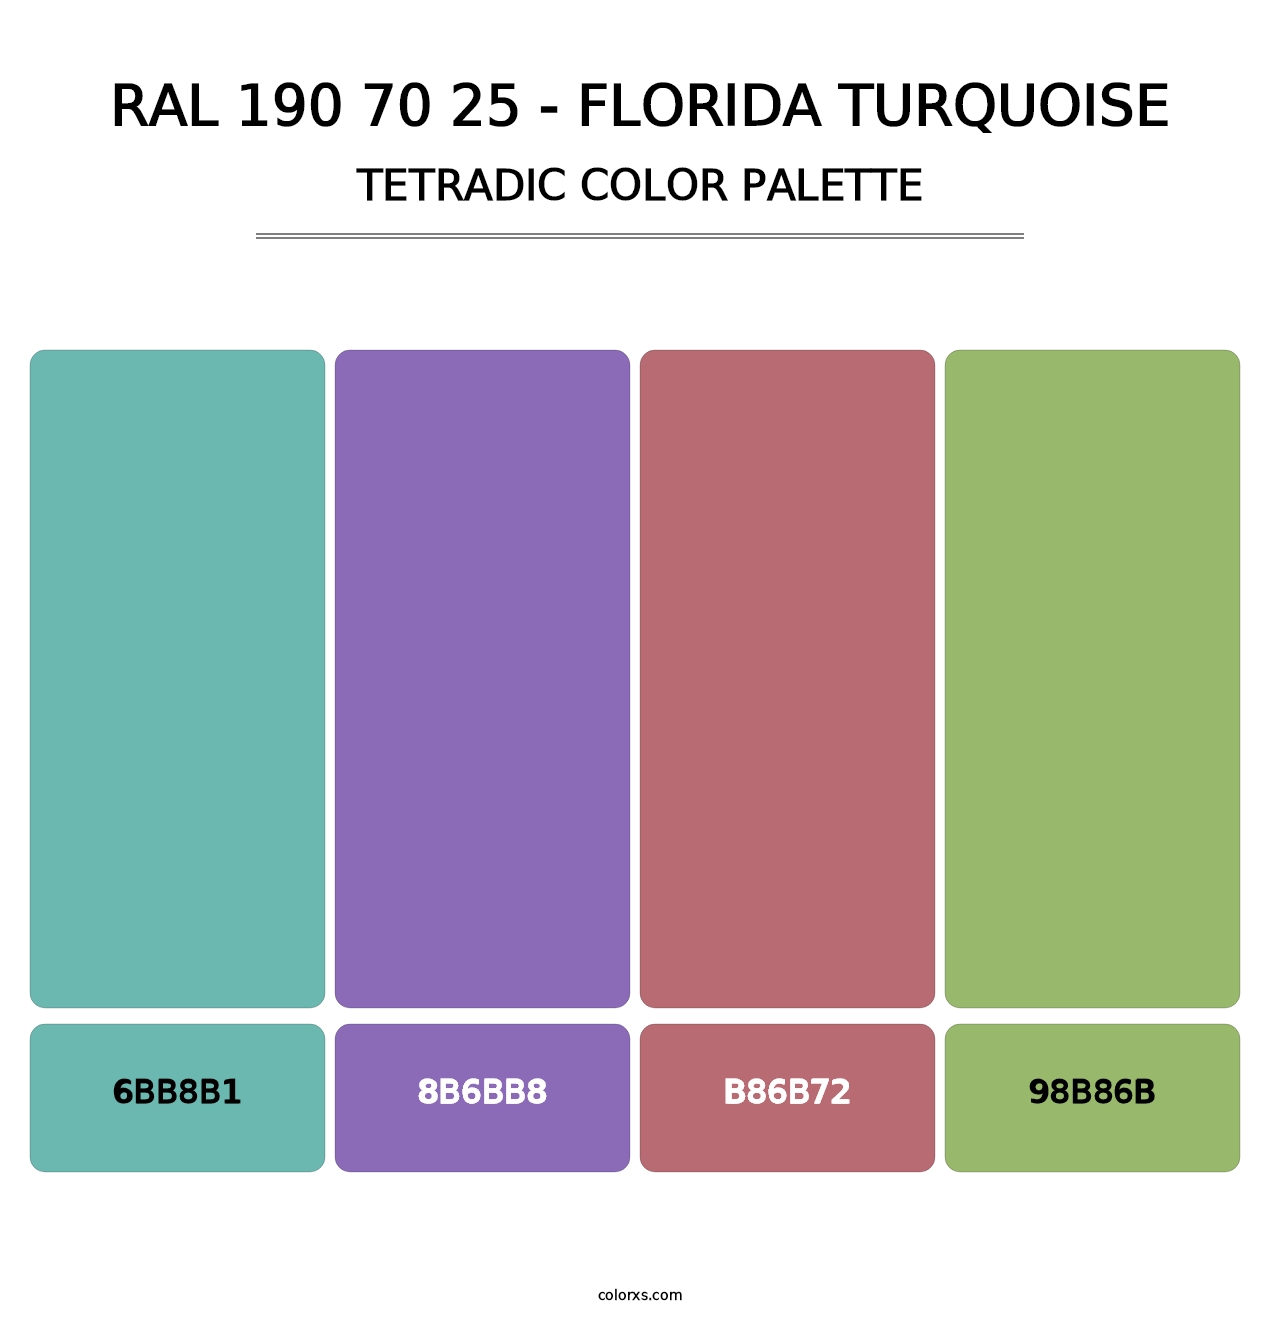 RAL 190 70 25 - Florida Turquoise - Tetradic Color Palette